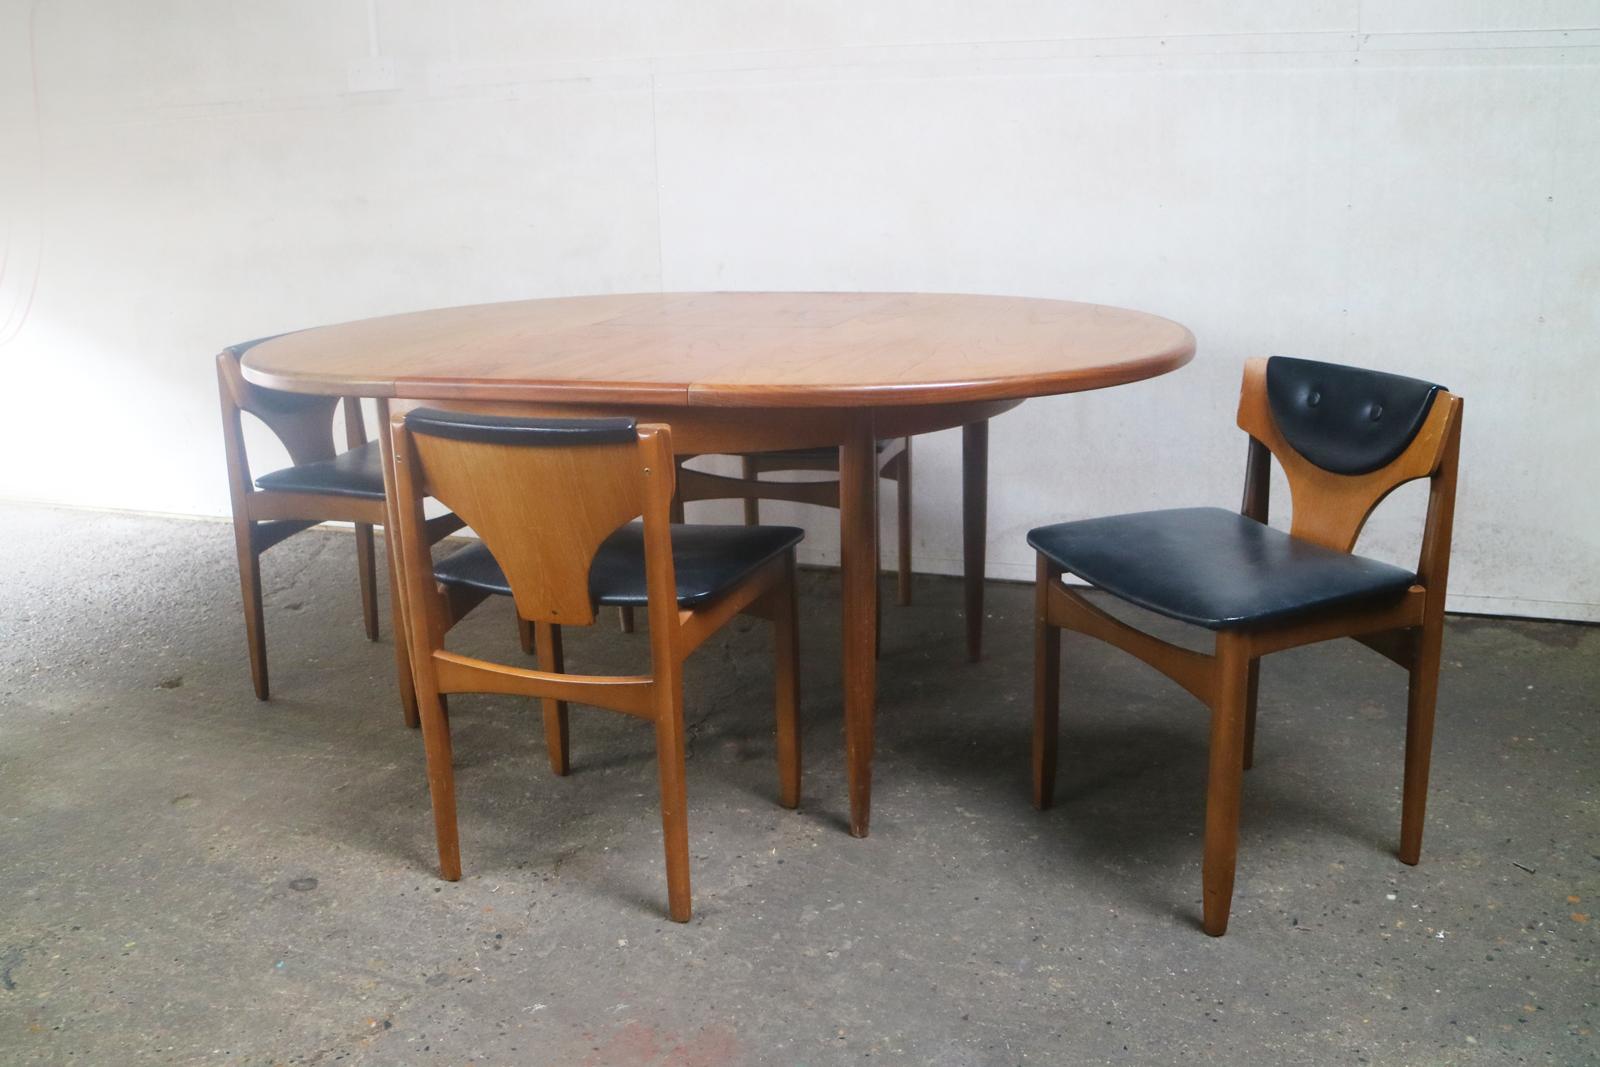 The low backs of these dining chairs create a stylish look for this Mid-Century Modern dining set. The table is by G plan and extends by means of a central flap.

The chairs are upholstered in the original black vinyl with button detail on the